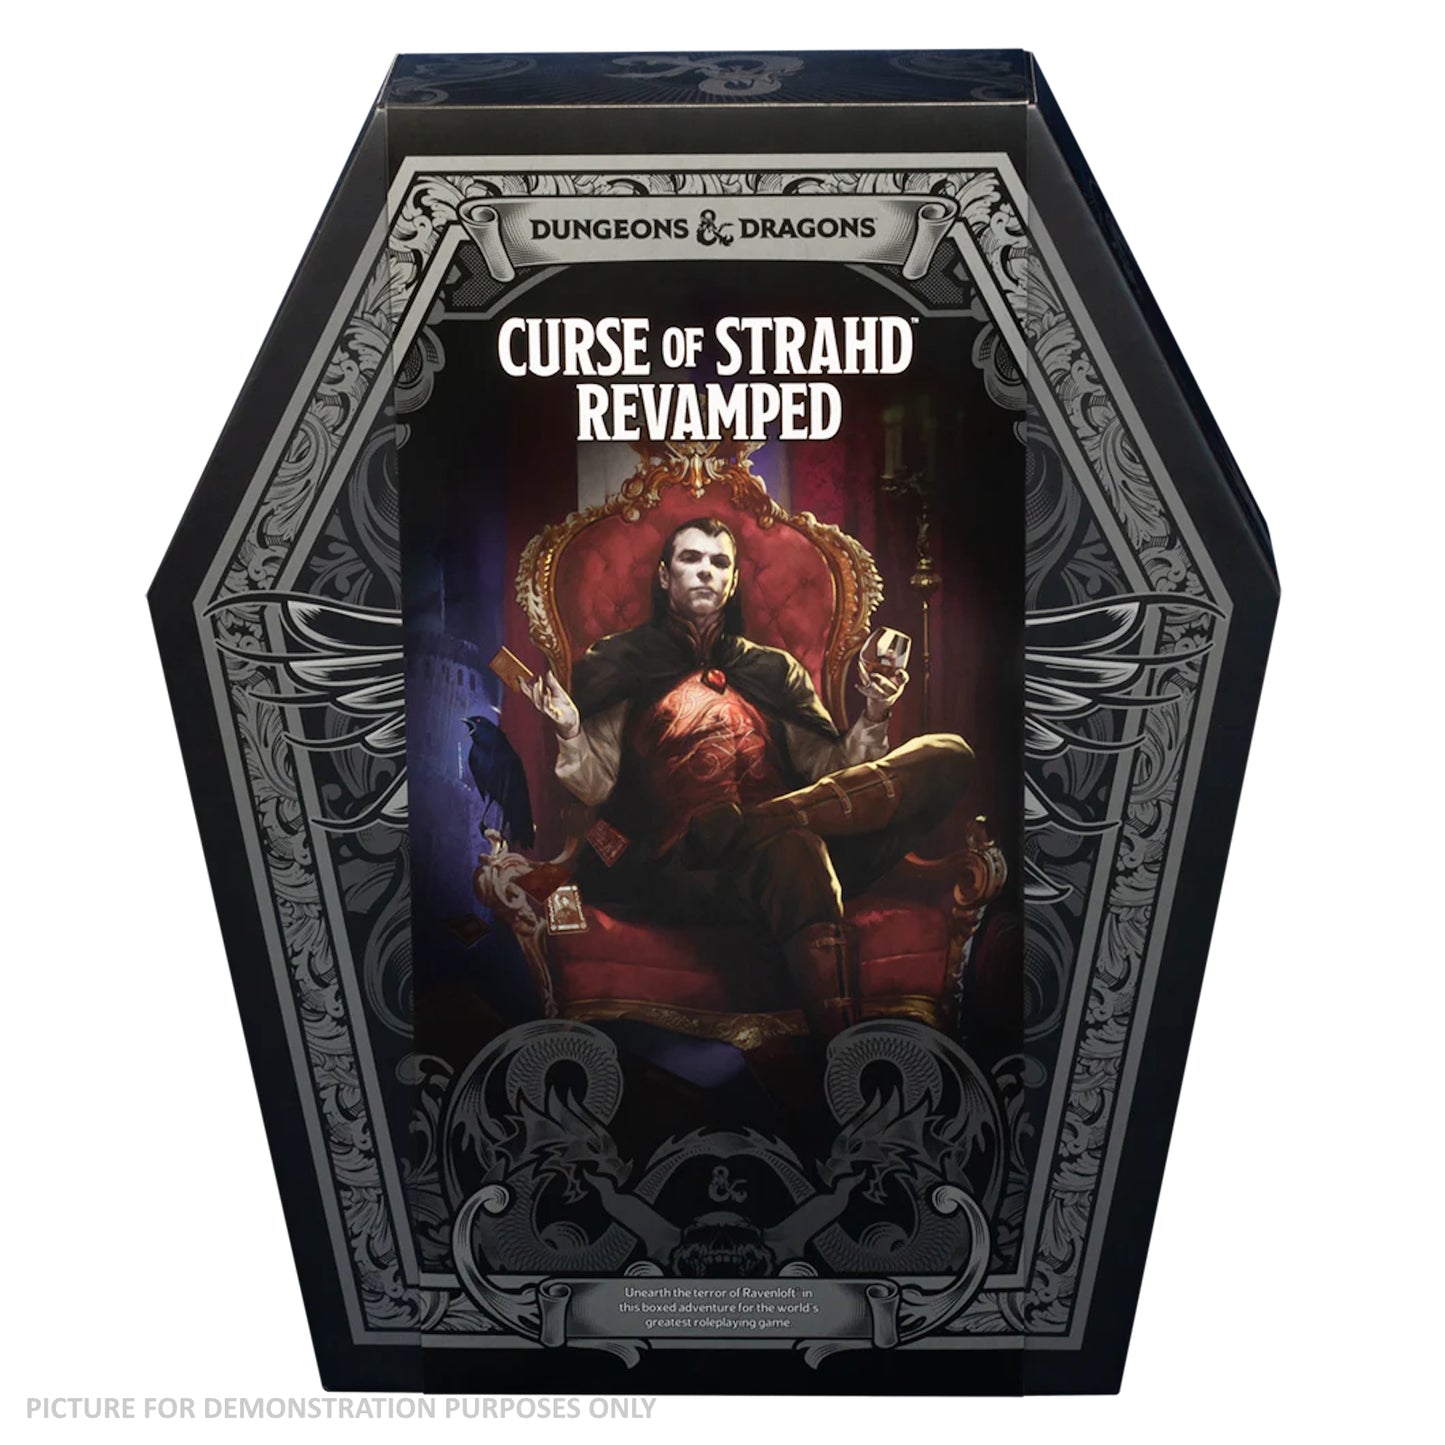 Dungeons & Dragons Curse of Strahd Revamped